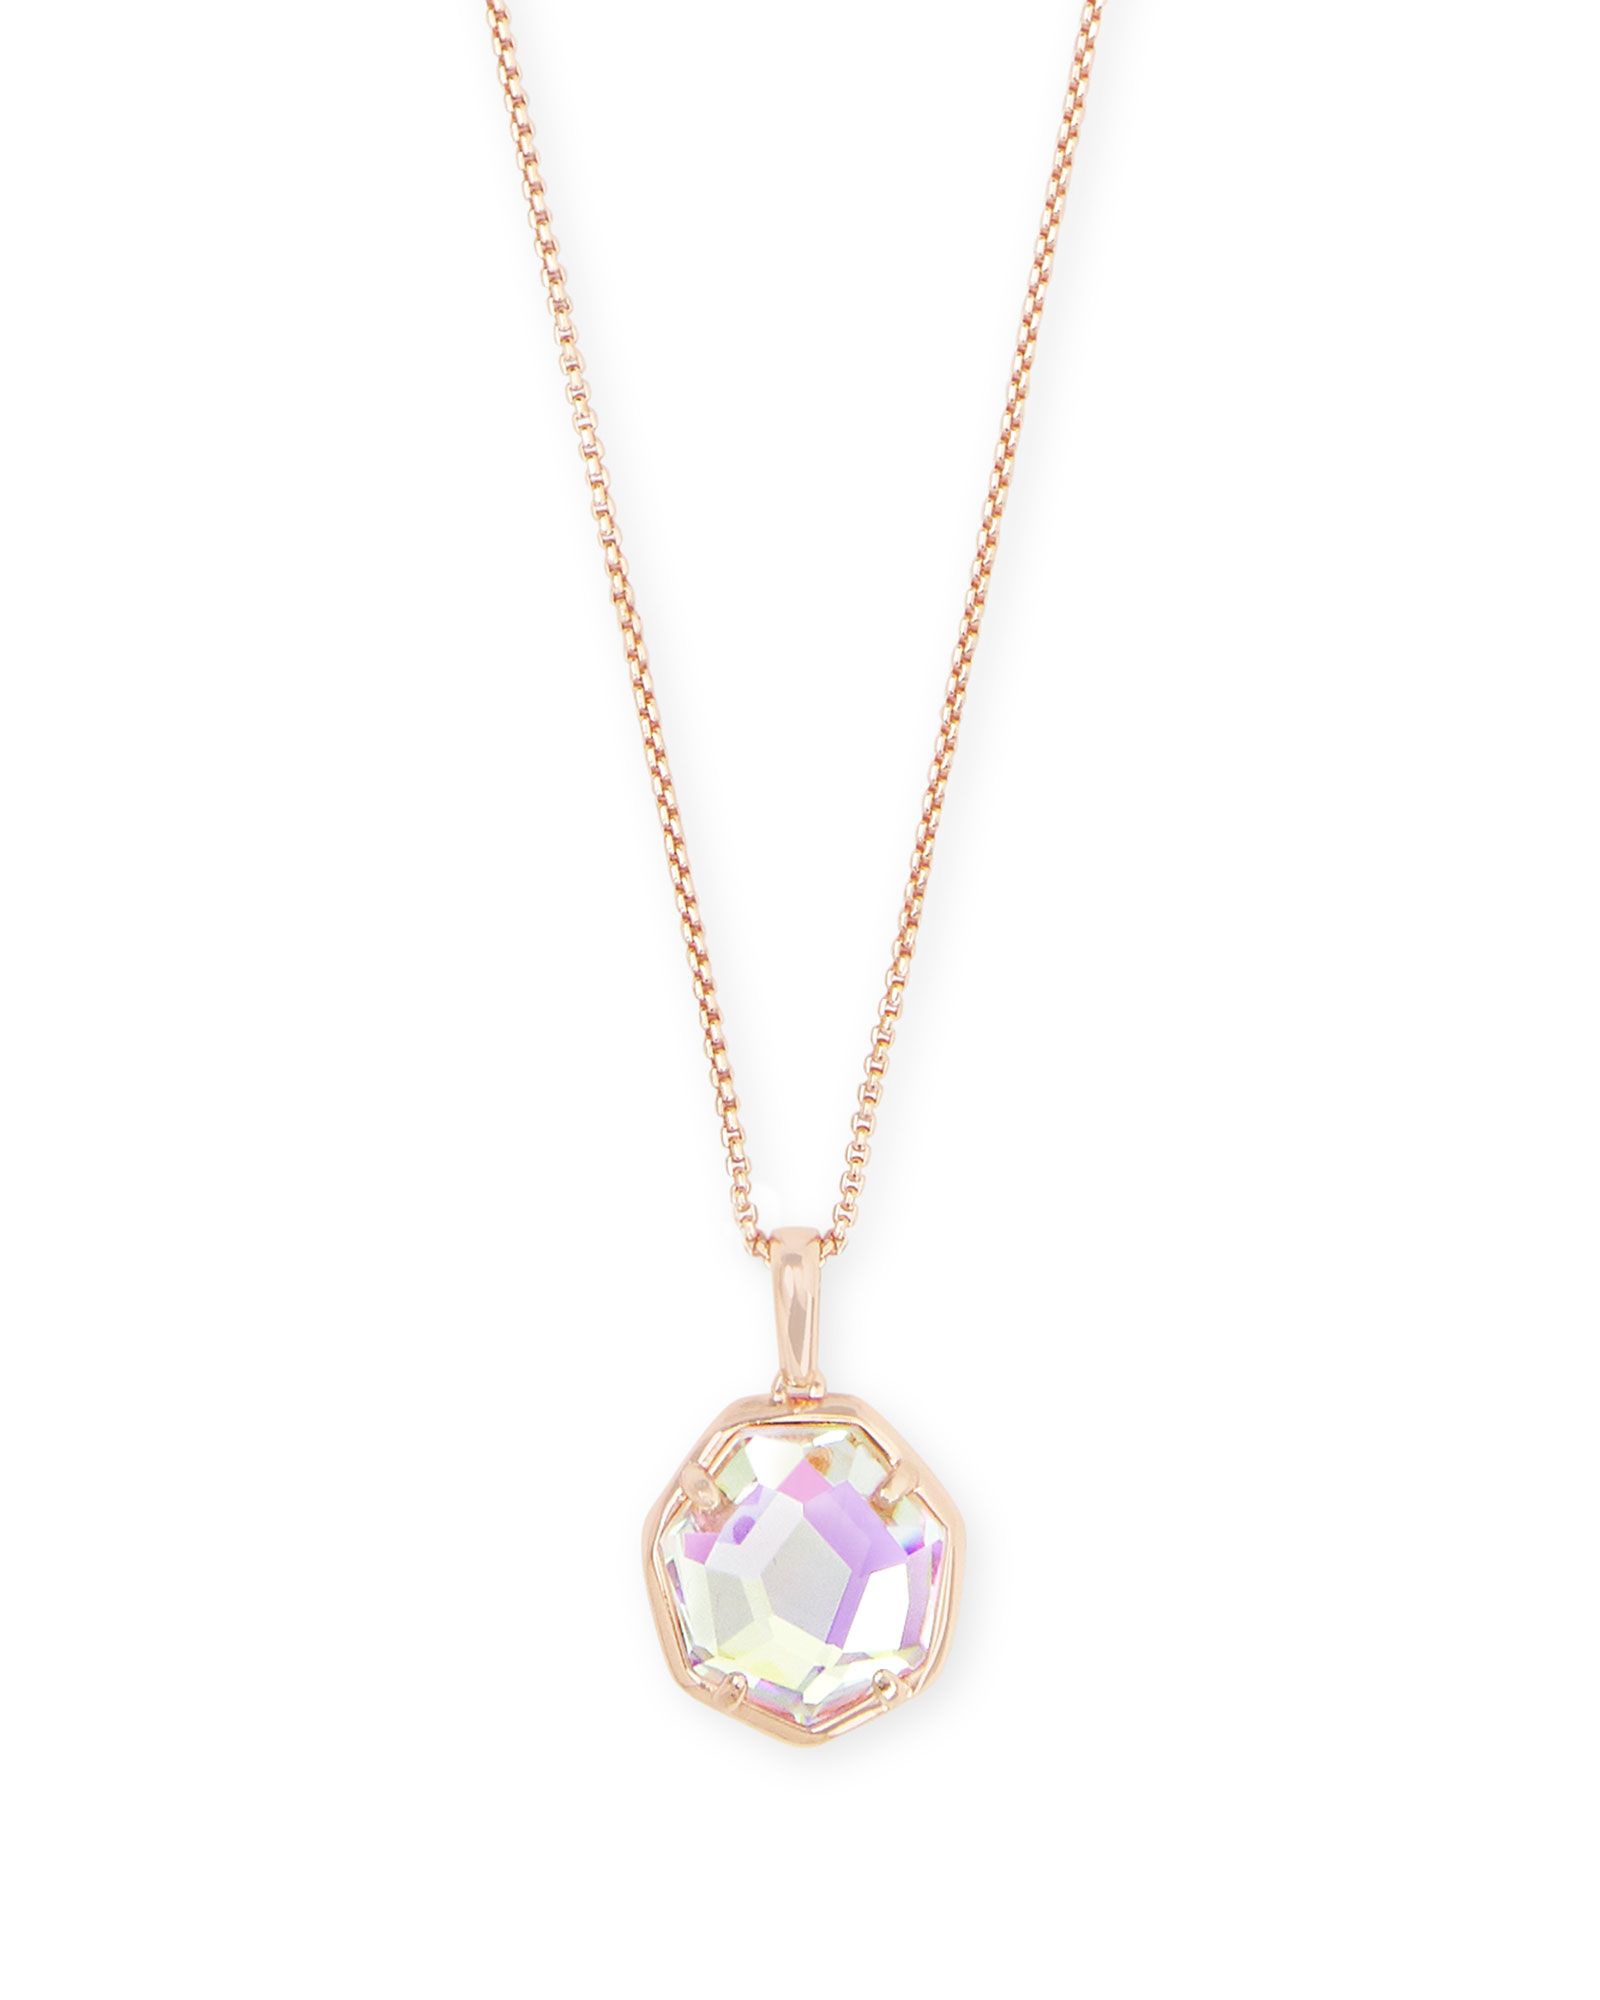 Cynthia Rose Gold Pendant Necklace in Dichroic Glass | Kendra Scott